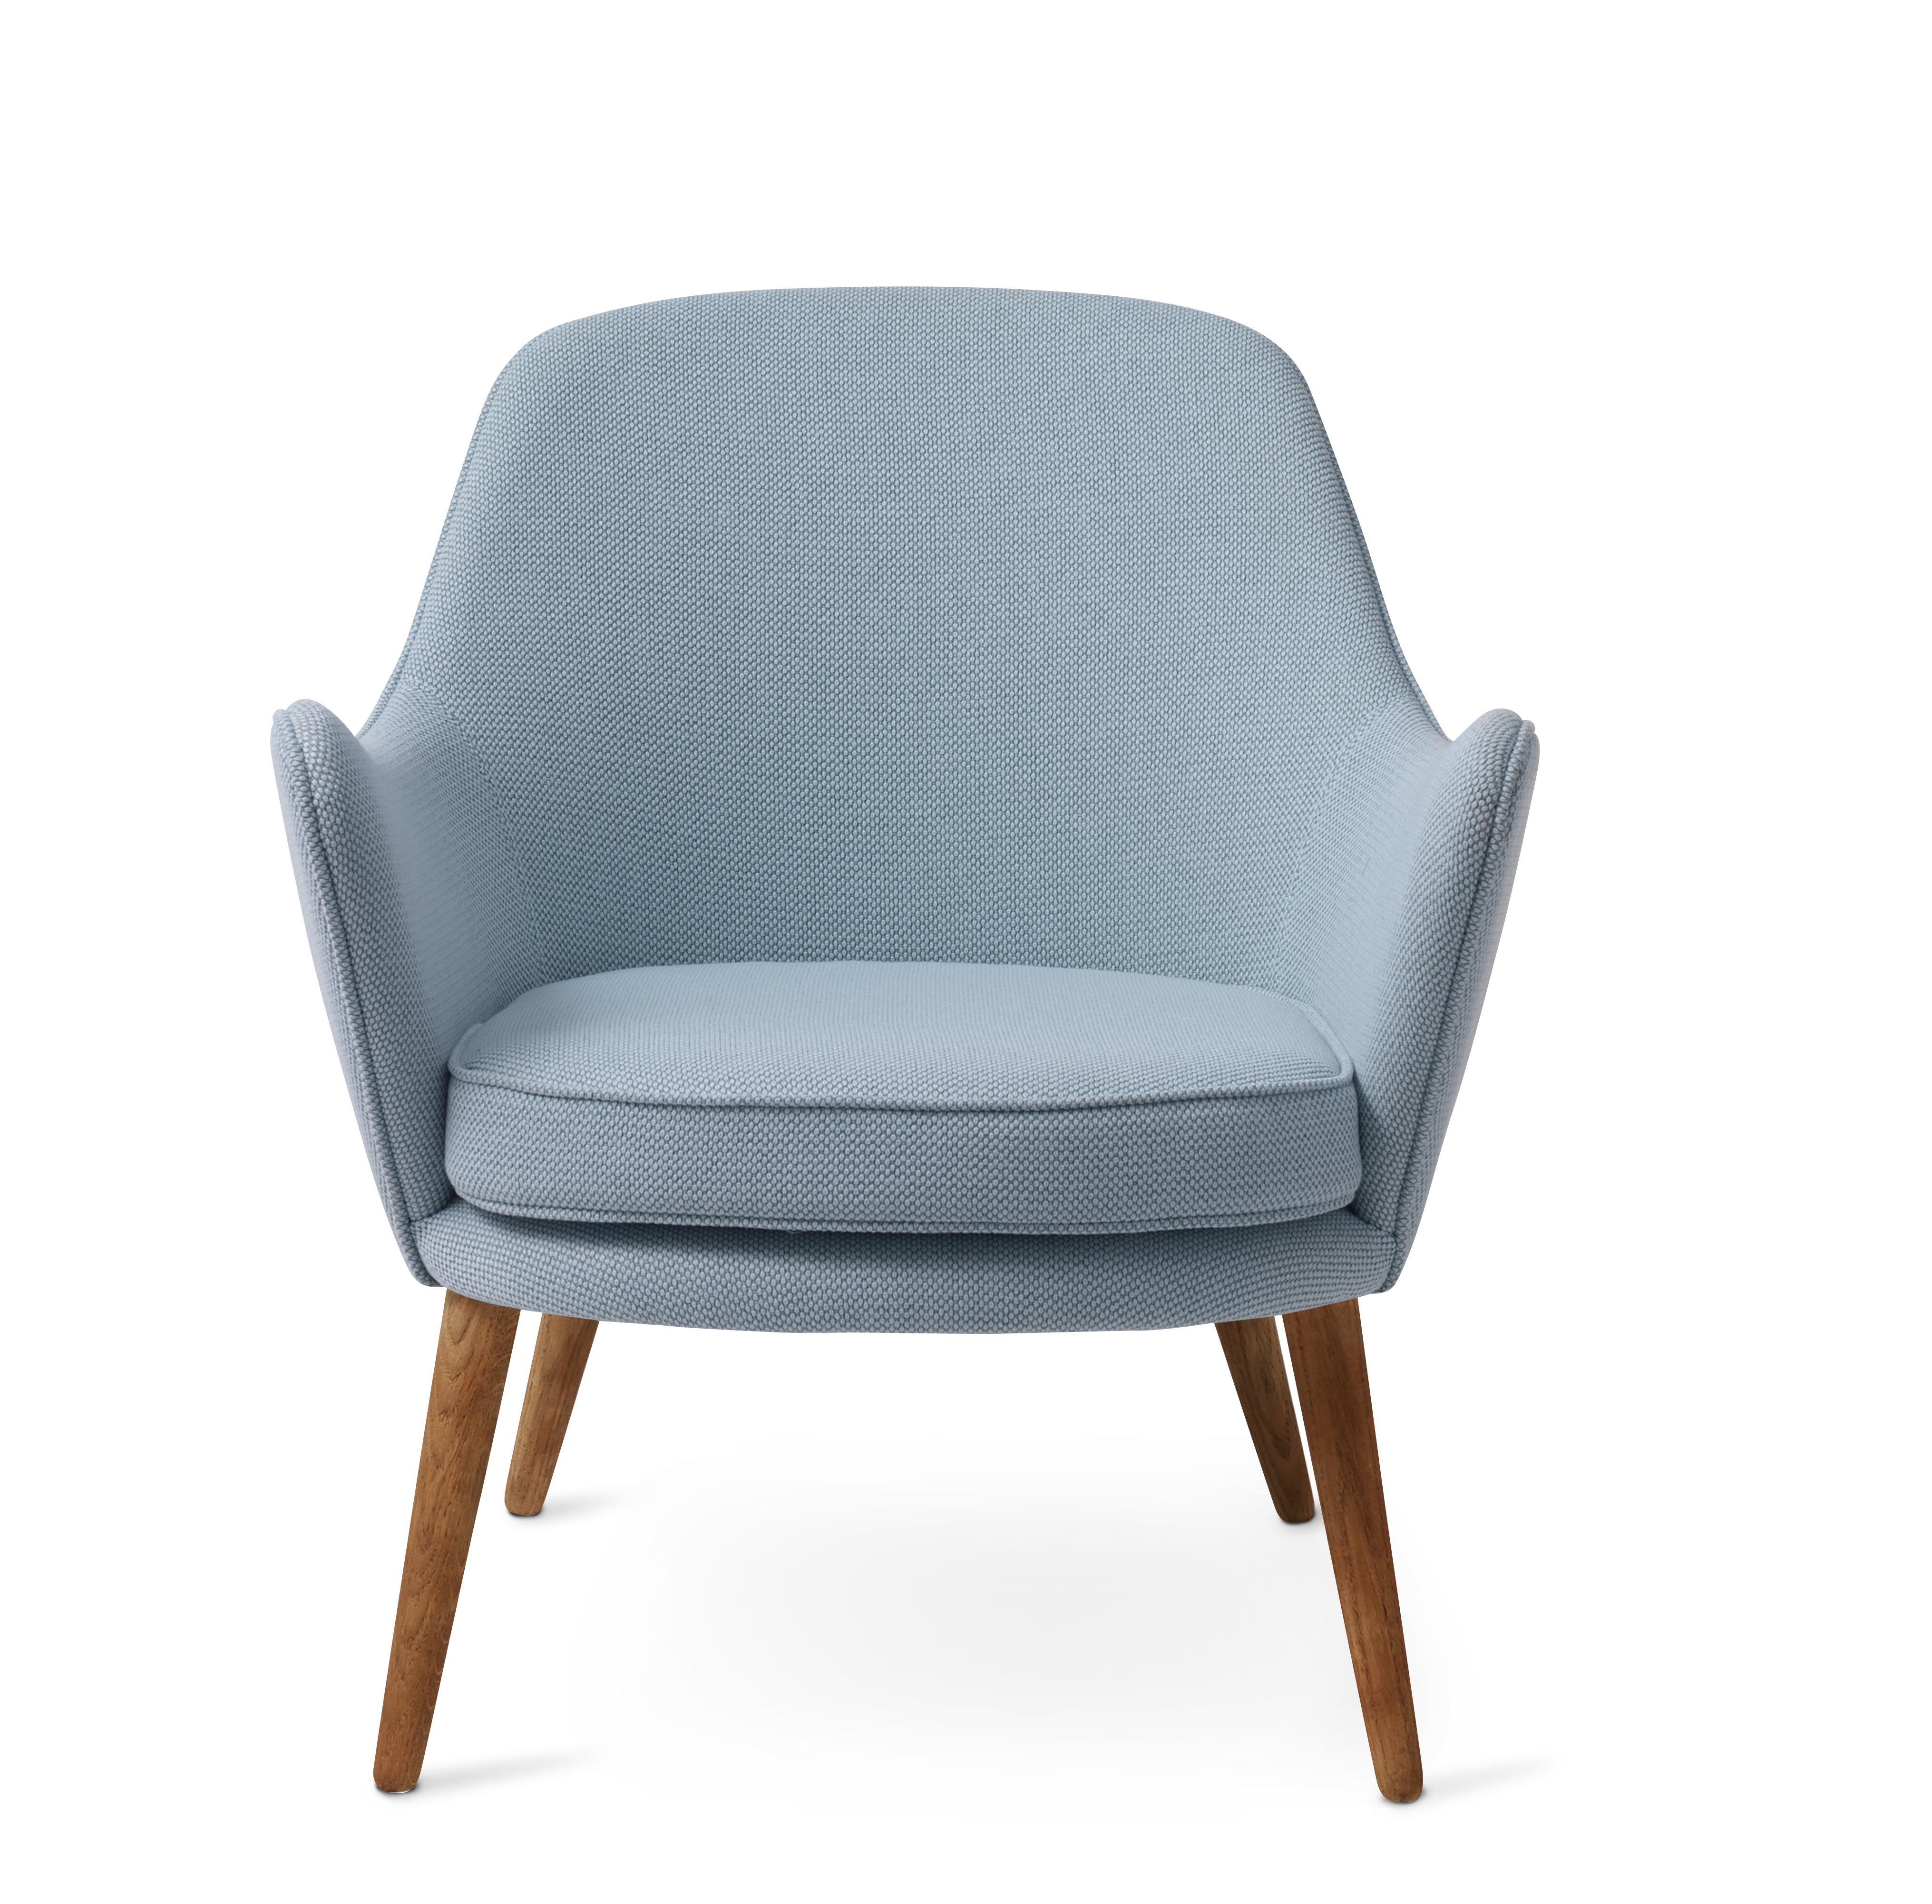 For Sale: Gray (Merit014/Merit014) Dwell Lounge Chair, by Hans Olsen from Warm Nordic